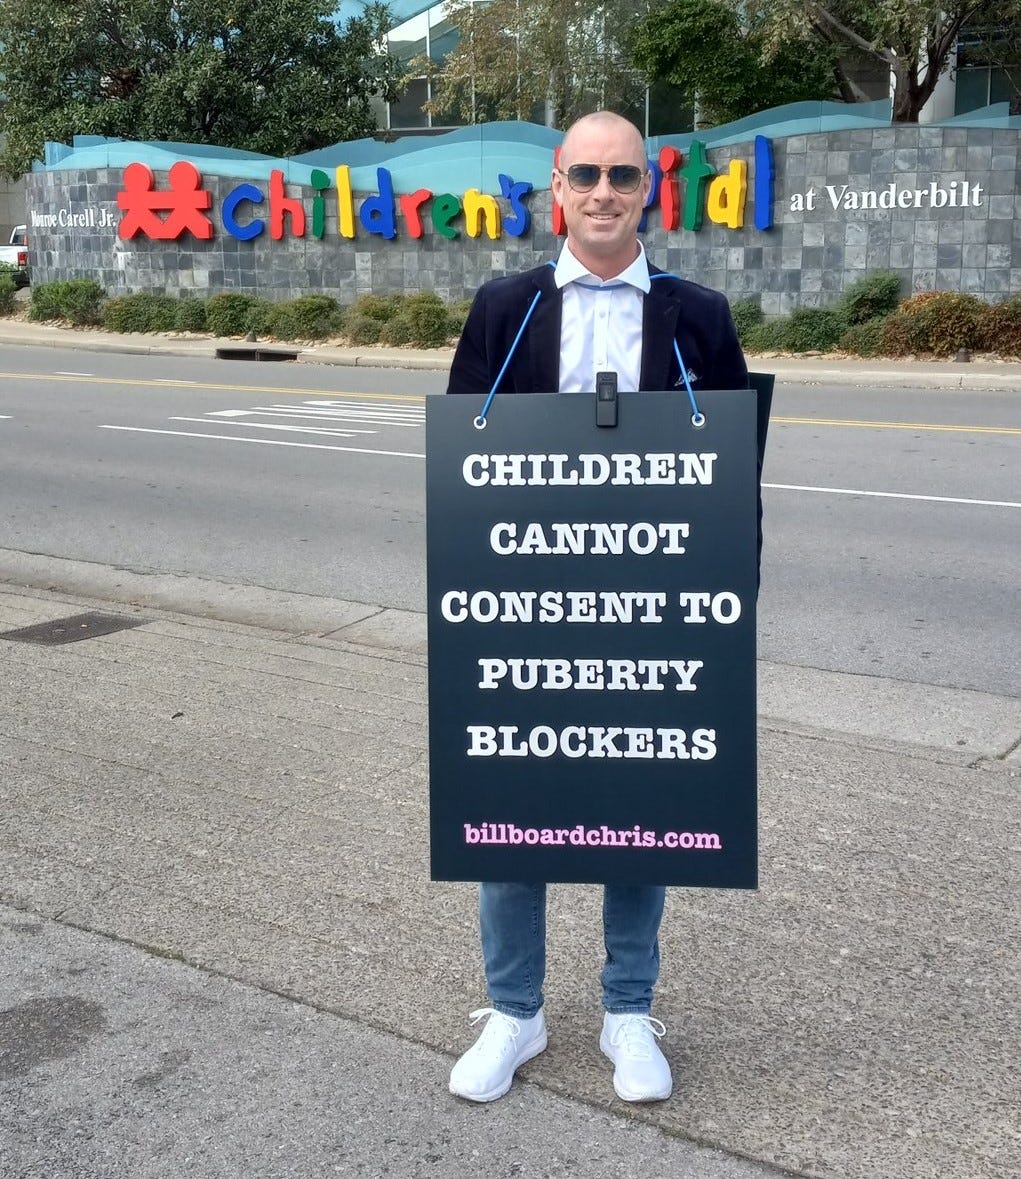 "Children cannot consent to puberty blockers." Chris wears his sign in front of the Vanderbilt Children's Hospital that recently announced they have stopped doing the transgender surgeries on minors that advocates of transition still insist do not exist